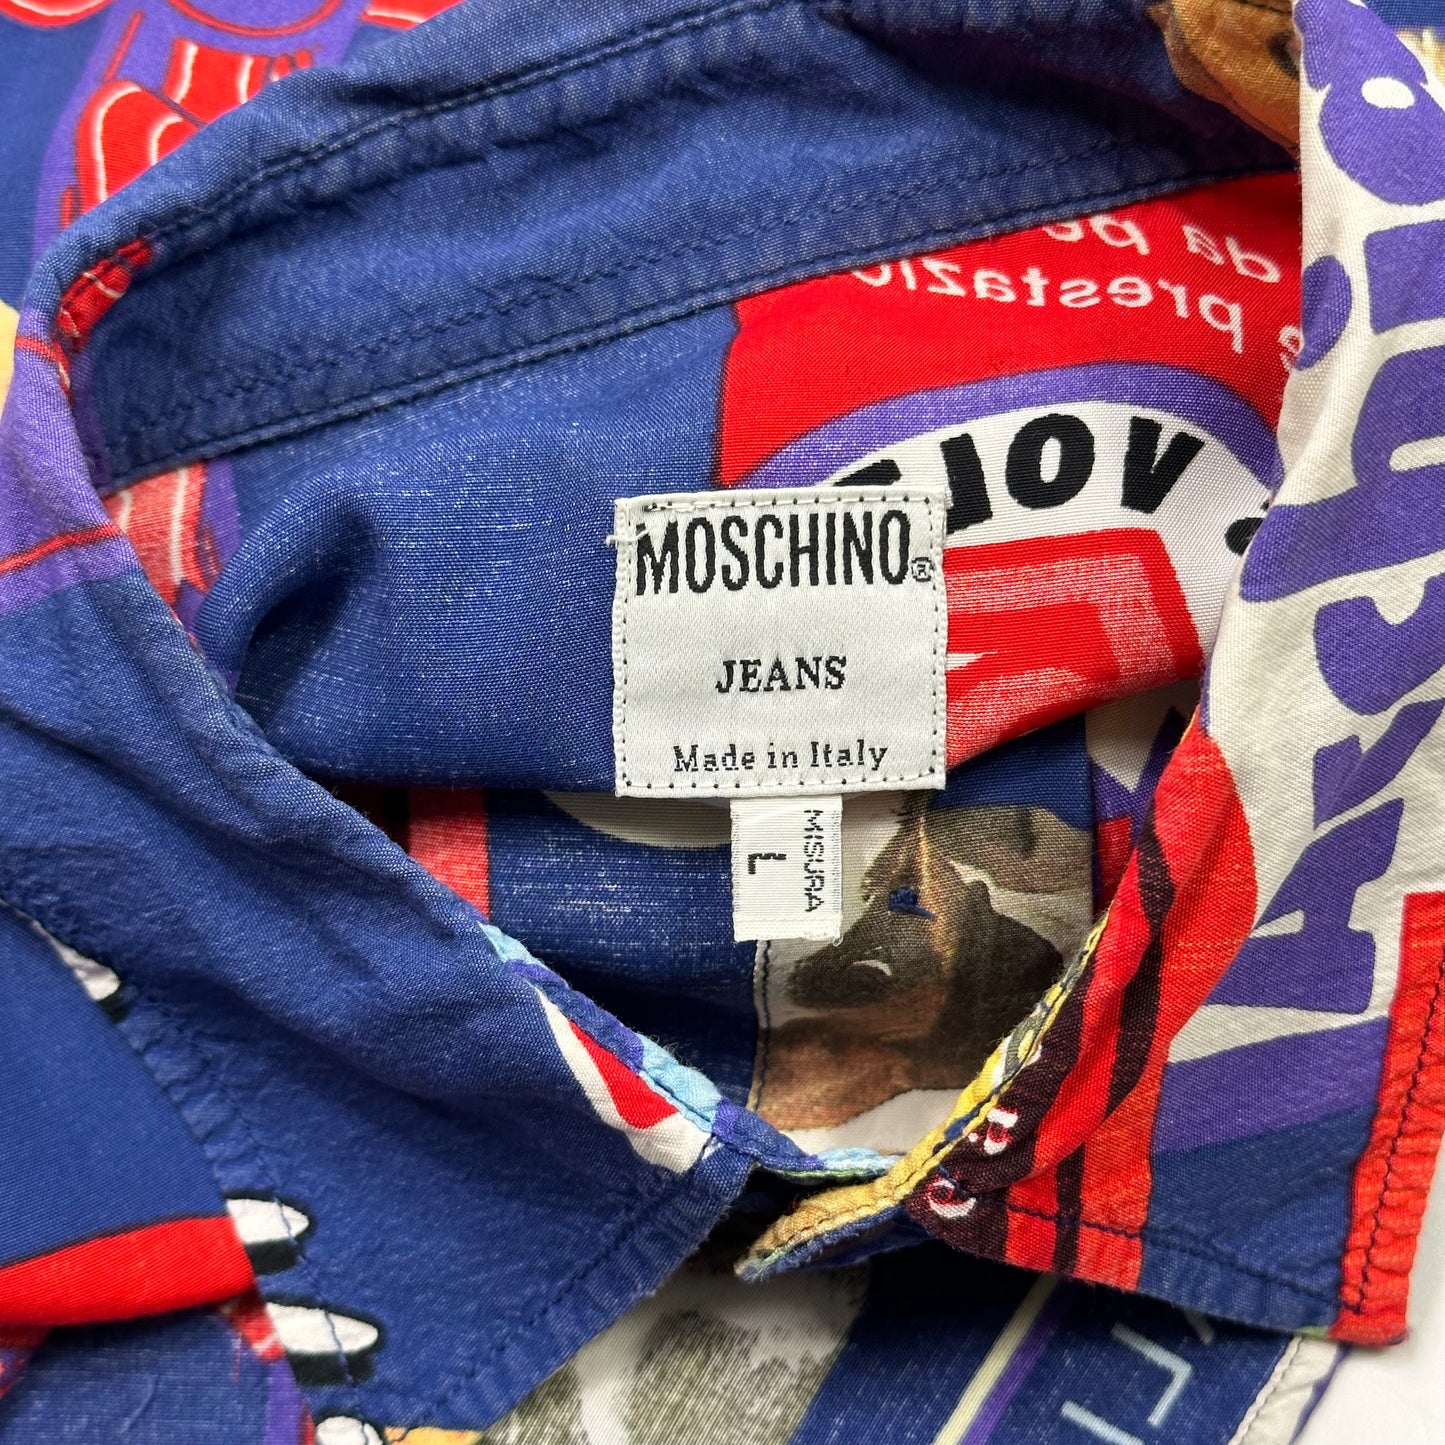 Moschino Jeans 1997 Cats and Dogs Shirt - L